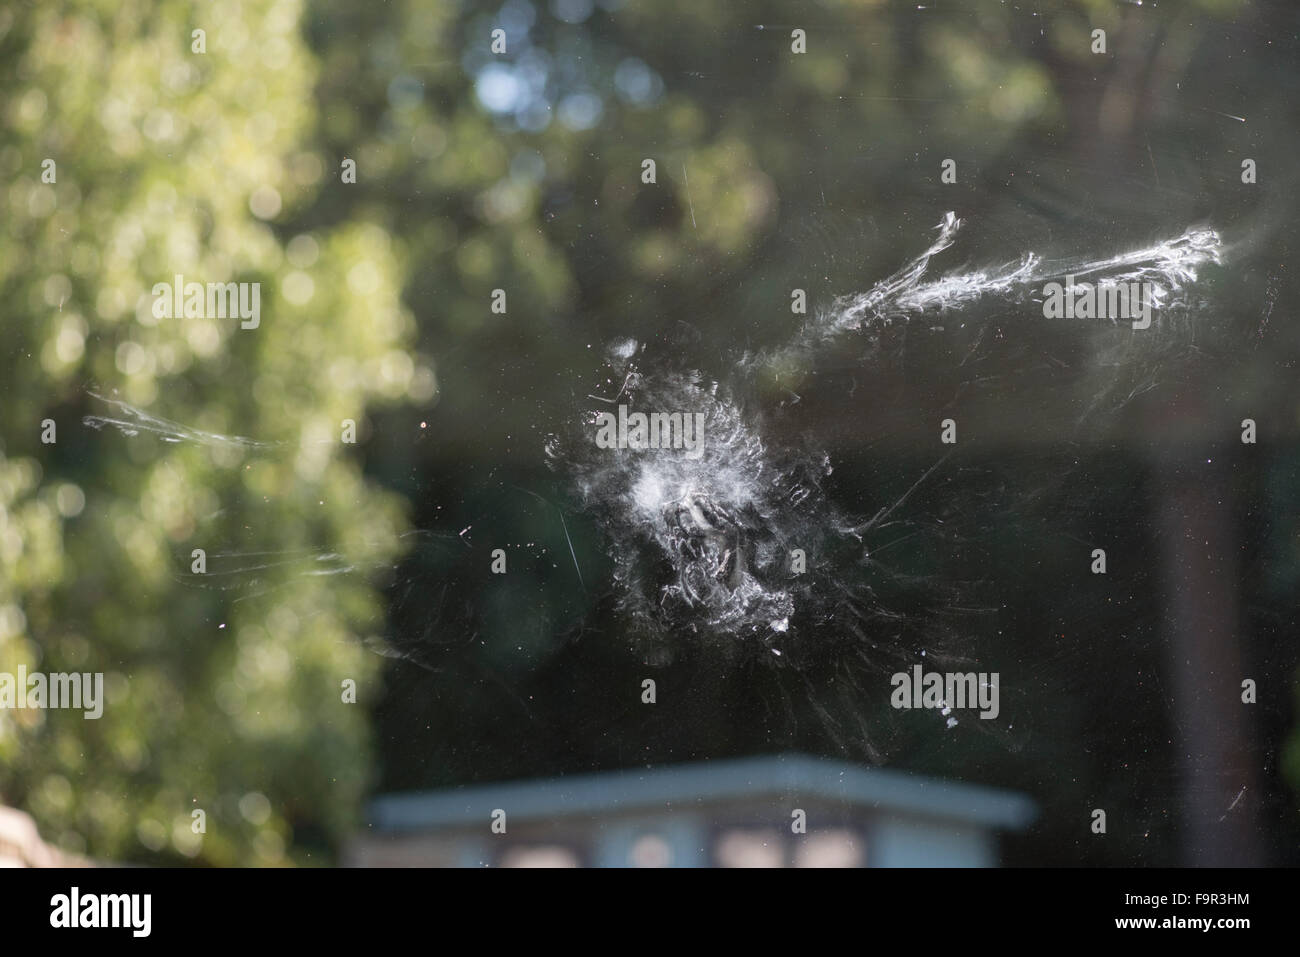 Wood Pigeon - mark on window after bird has flown into the glass. Surrey, England Stock Photo